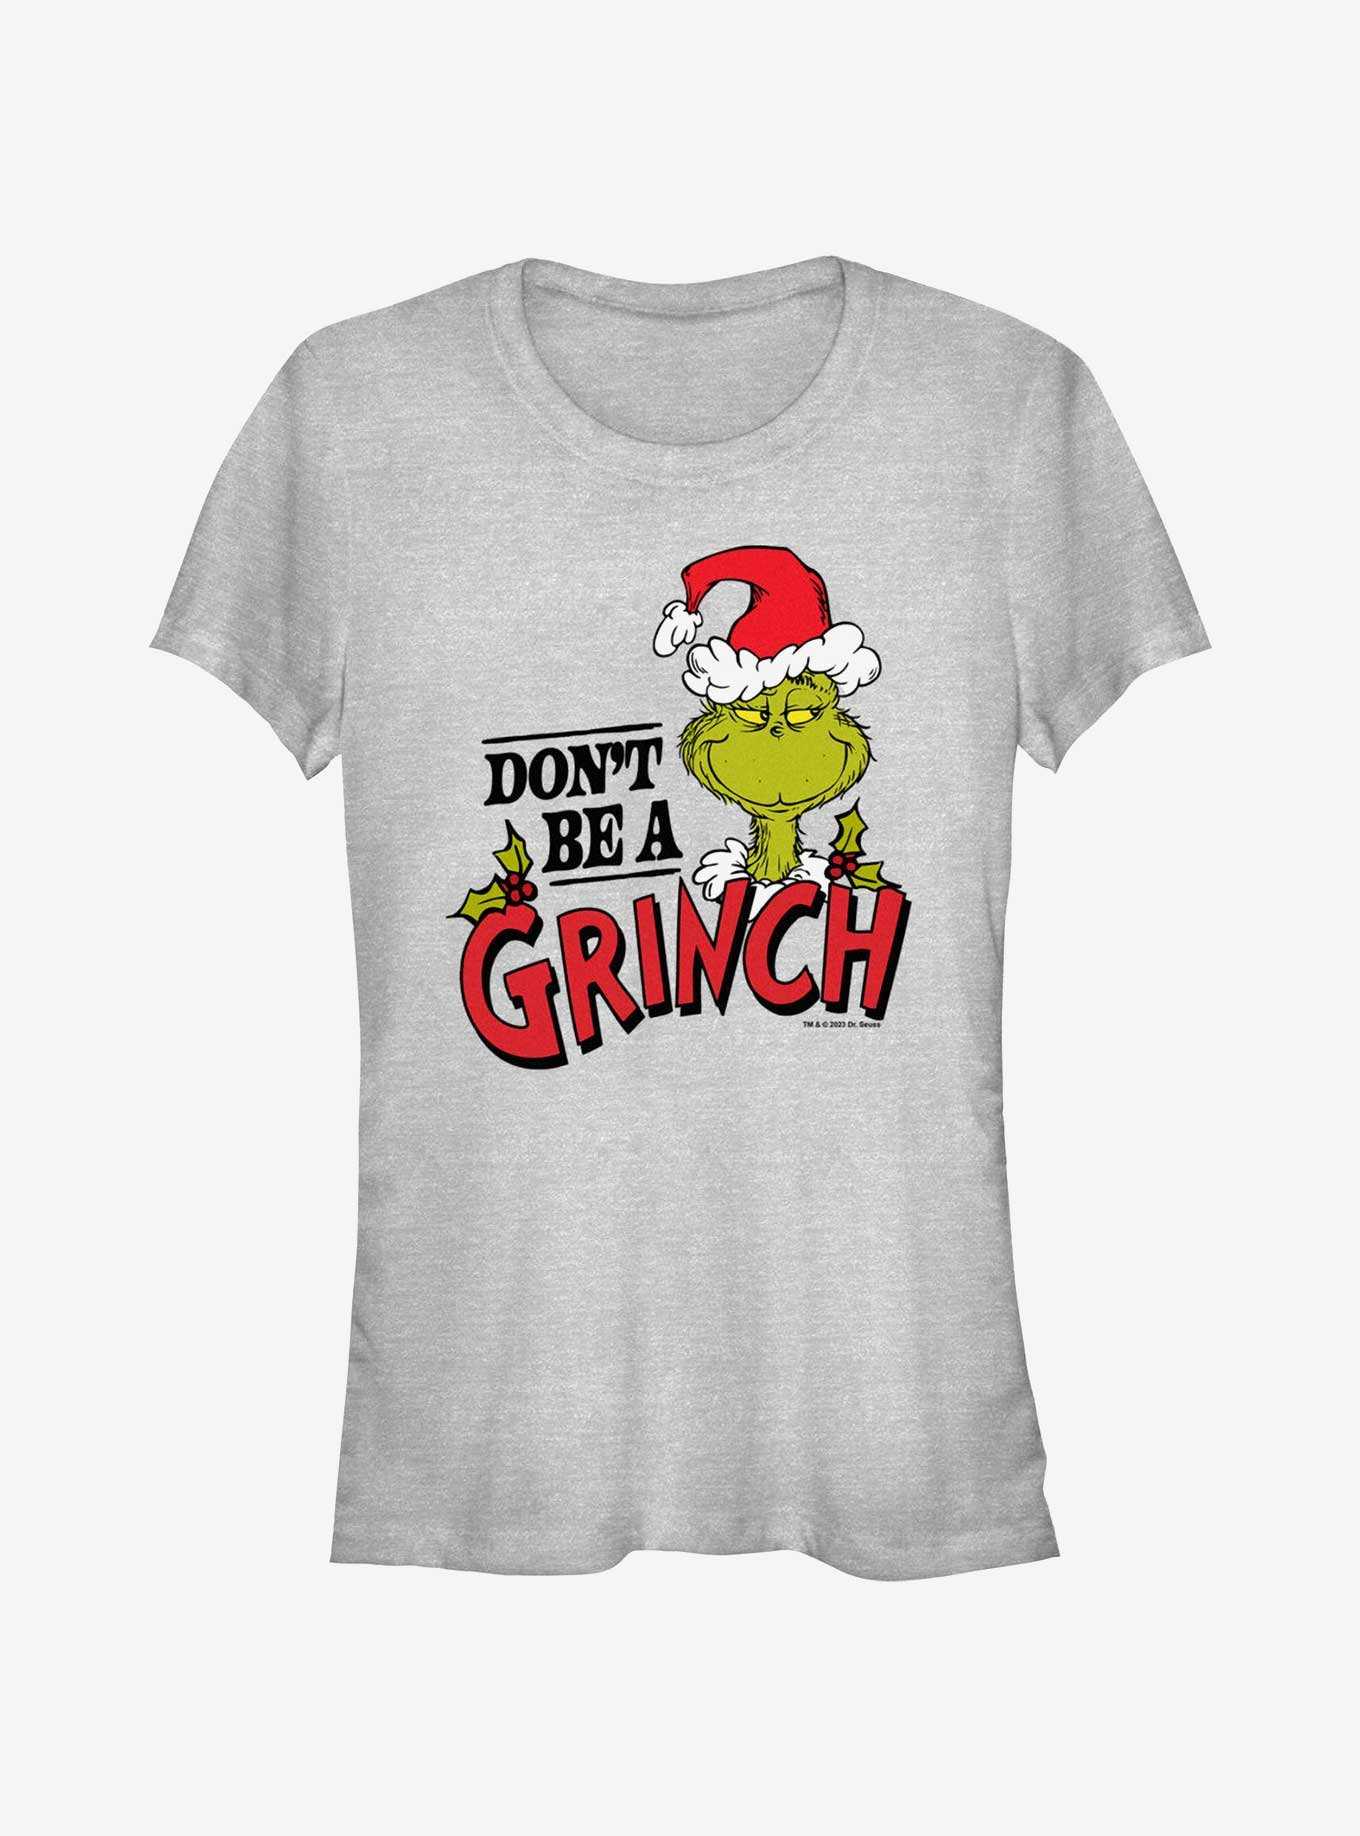 Hollow Hoodie or Legging for Fan, The Grinch-Christmas Shirt